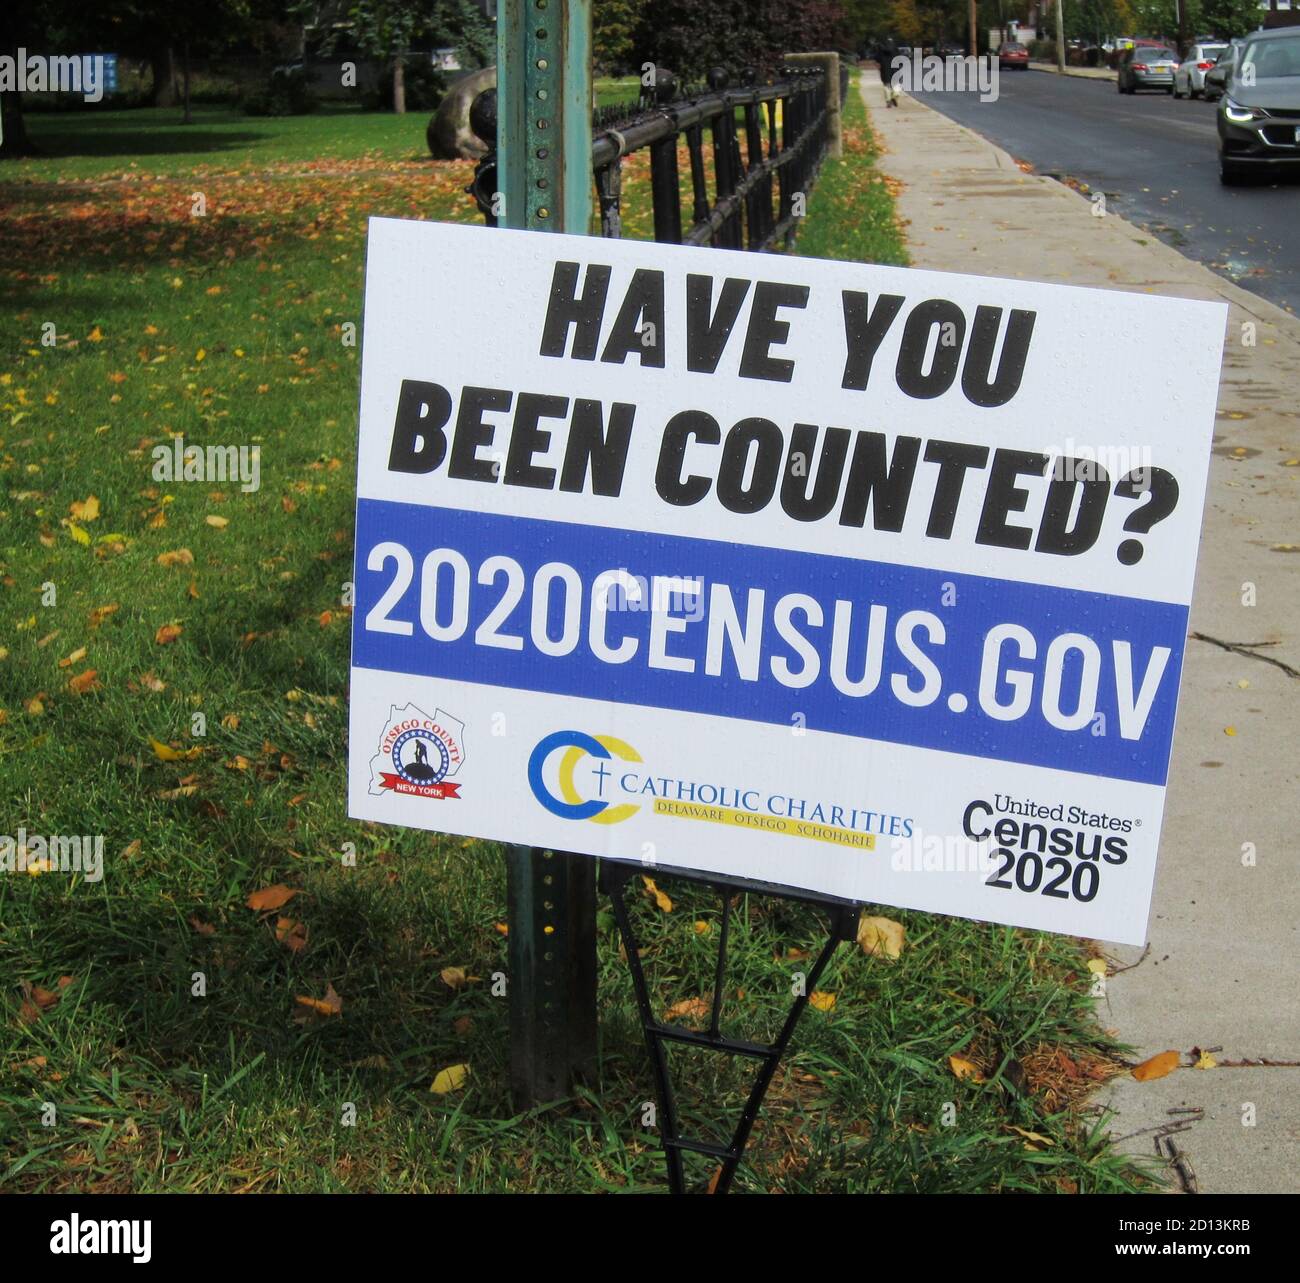 A standalone lawn sign for the 2020 Census in America asks 'Have You Been Counted?' The enumeration takes place every 10 years in the United States. Stock Photo